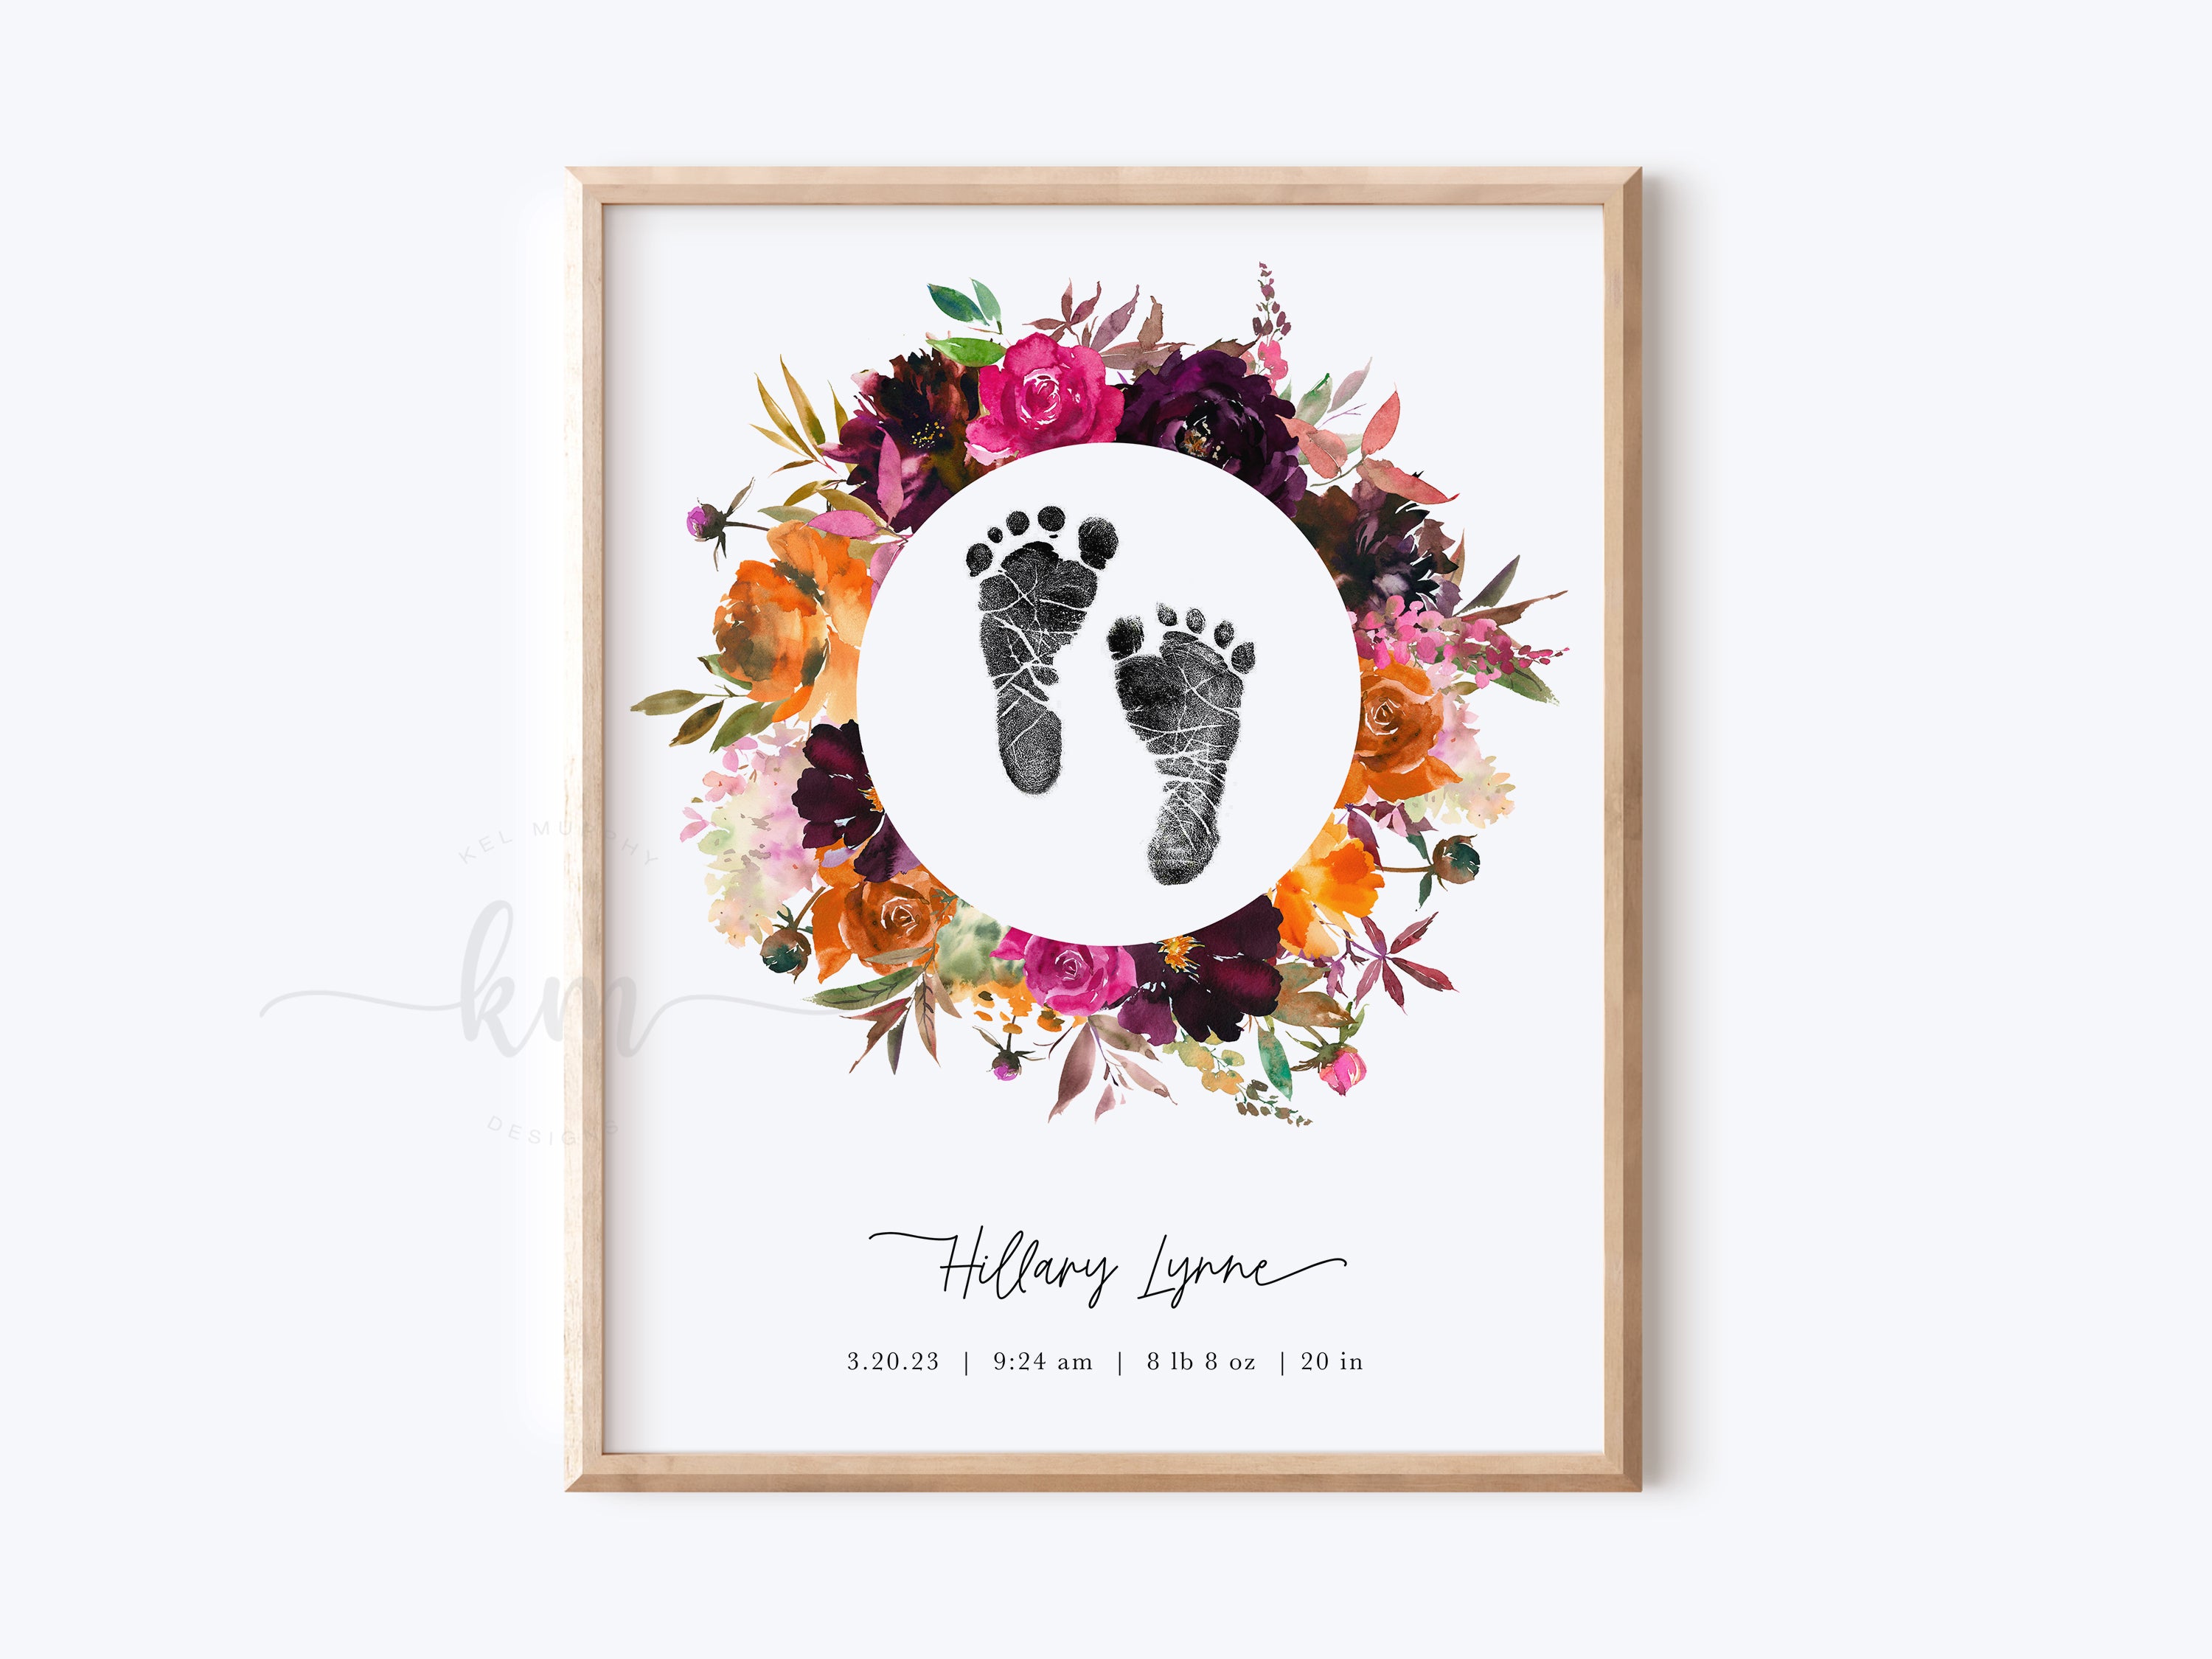 Acrylic Baby Footprint With Wood Stand Personalized Gift for Mom Footprint  Art With Your Baby's Footprints Newborn Gift 